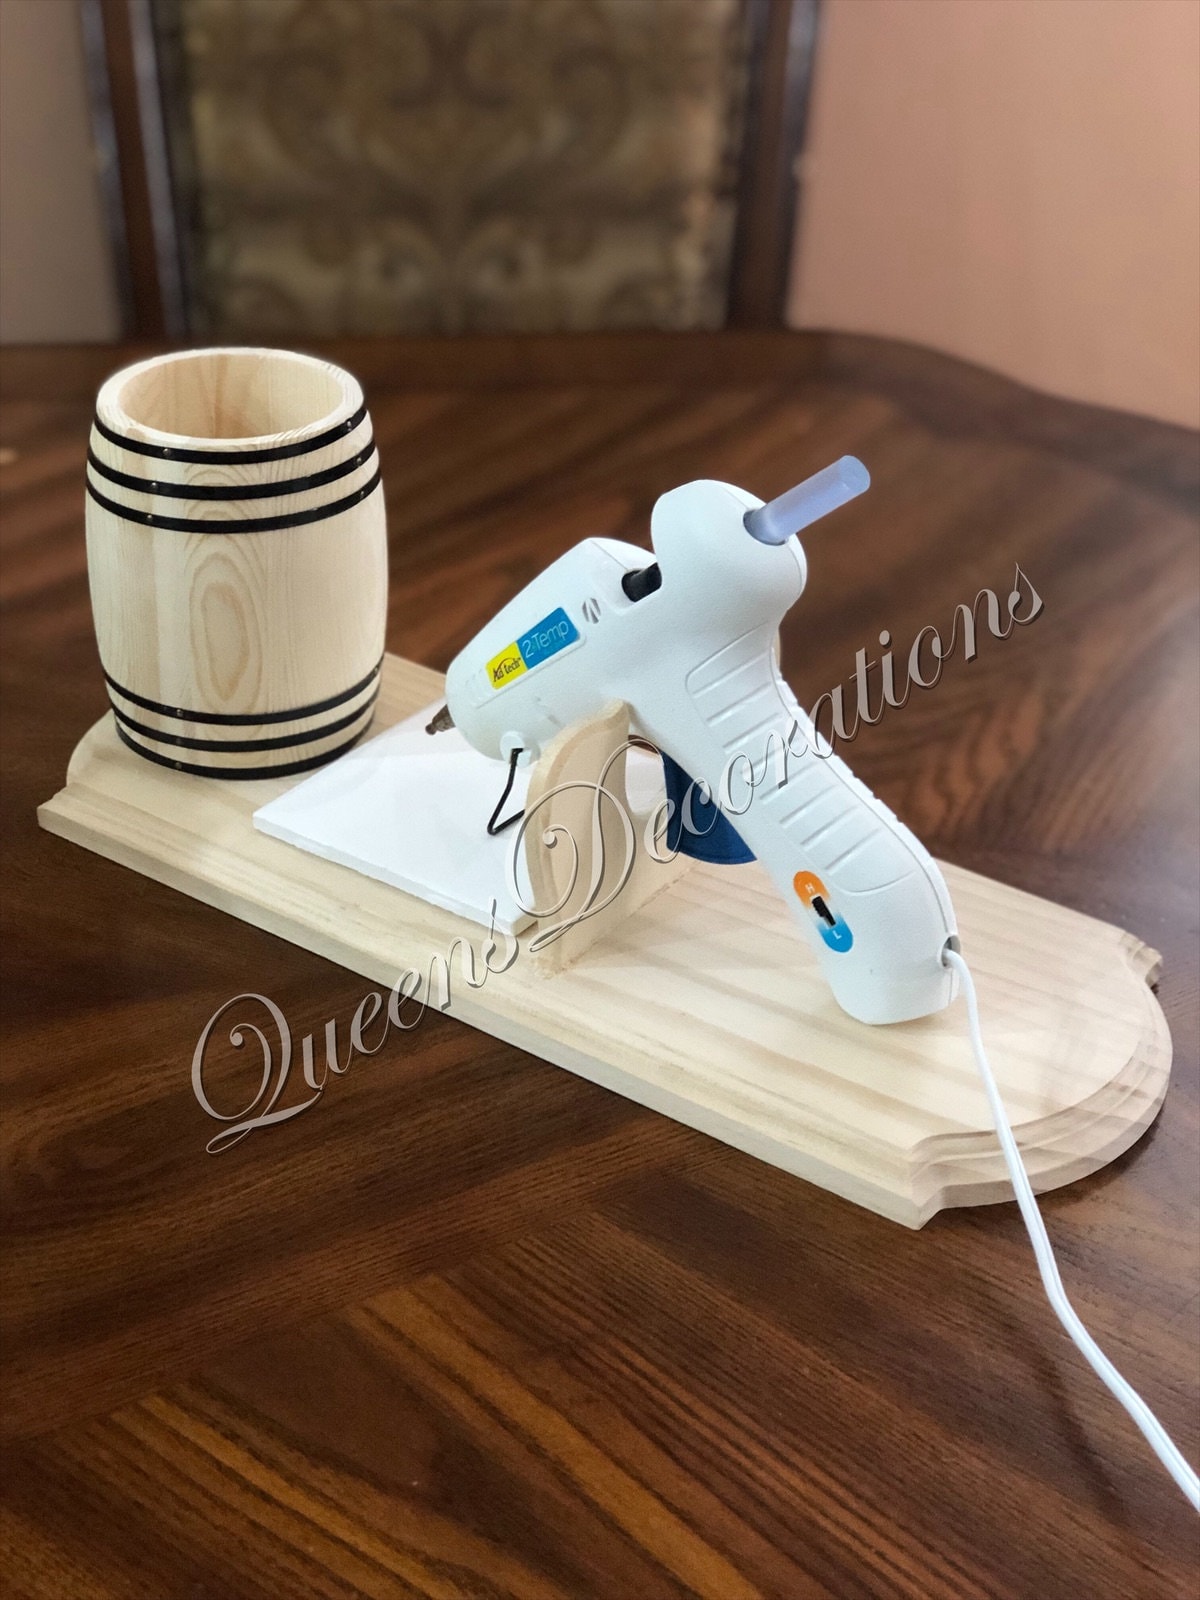 Hot Glue Gun Holder-stand/ Organizer and Basis for Manual Works 